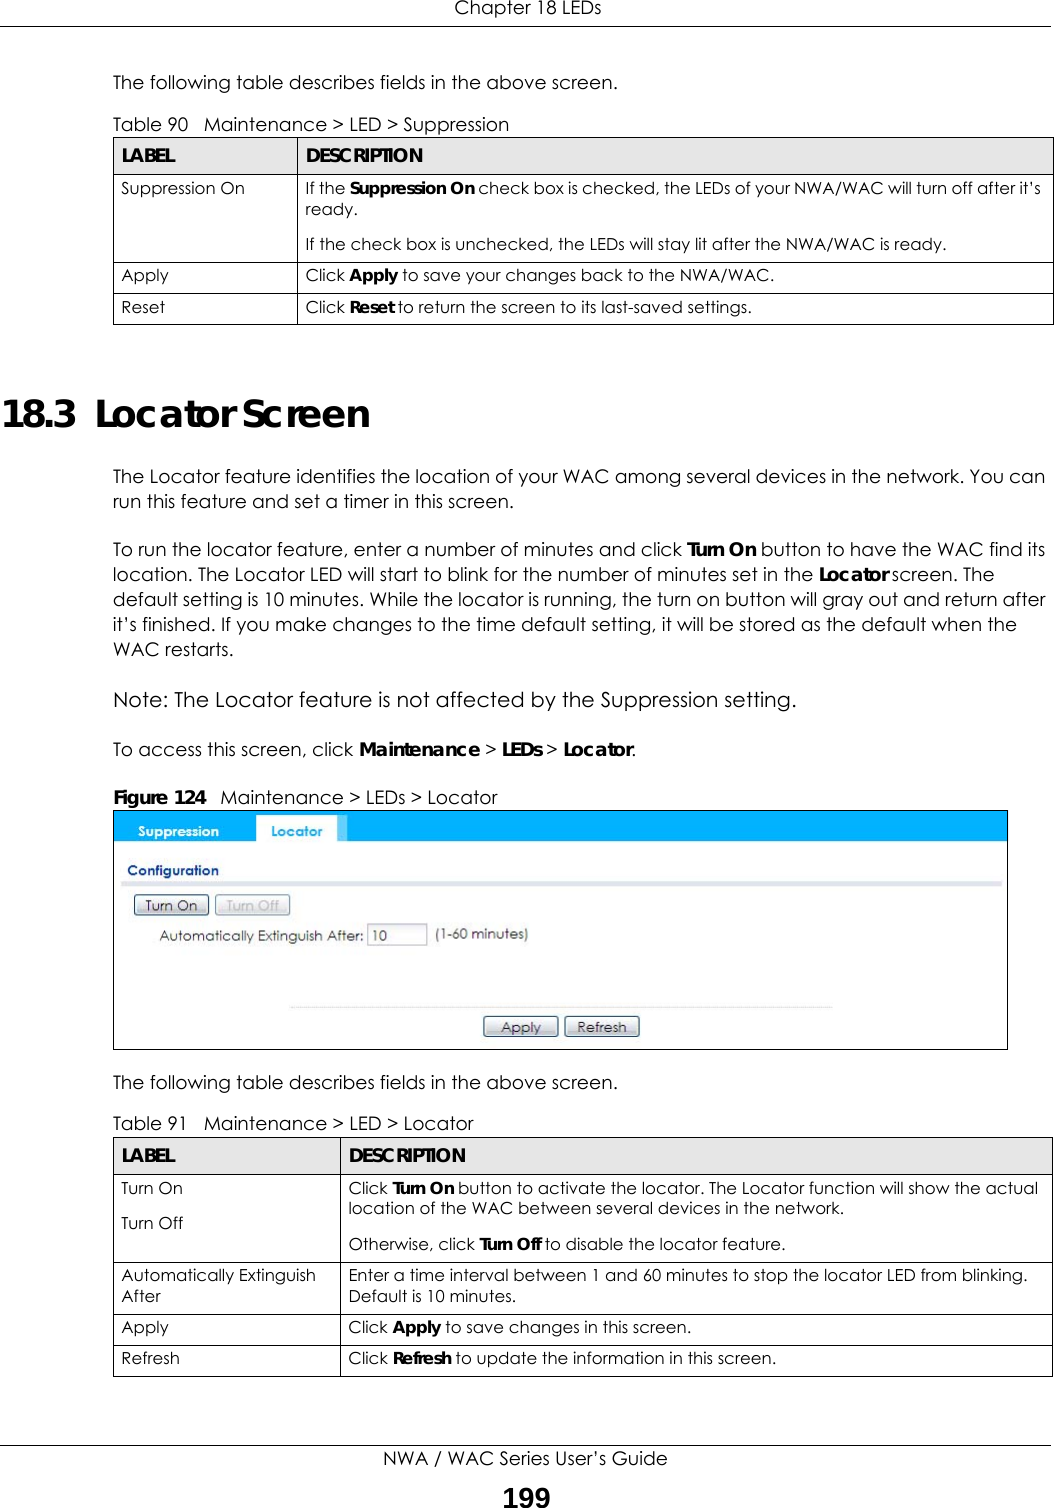  Chapter 18 LEDsNWA / WAC Series User’s Guide199The following table describes fields in the above screen. 18.3  Locator Screen The Locator feature identifies the location of your WAC among several devices in the network. You can run this feature and set a timer in this screen.To run the locator feature, enter a number of minutes and click Turn On button to have the WAC find its location. The Locator LED will start to blink for the number of minutes set in the Locator screen. The default setting is 10 minutes. While the locator is running, the turn on button will gray out and return after it’s finished. If you make changes to the time default setting, it will be stored as the default when the WAC restarts. Note: The Locator feature is not affected by the Suppression setting.To access this screen, click Maintenance &gt; LEDs &gt; Locator.Figure 124   Maintenance &gt; LEDs &gt; LocatorThe following table describes fields in the above screen. Table 90   Maintenance &gt; LED &gt; Suppression LABEL DESCRIPTIONSuppression On If the Suppression On check box is checked, the LEDs of your NWA/WAC will turn off after it’s ready. If the check box is unchecked, the LEDs will stay lit after the NWA/WAC is ready.Apply Click Apply to save your changes back to the NWA/WAC.Reset Click Reset to return the screen to its last-saved settings. Table 91   Maintenance &gt; LED &gt; LocatorLABEL DESCRIPTIONTurn OnTurn OffClick Turn On button to activate the locator. The Locator function will show the actual location of the WAC between several devices in the network.Otherwise, click Turn Off to disable the locator feature.Automatically Extinguish AfterEnter a time interval between 1 and 60 minutes to stop the locator LED from blinking. Default is 10 minutes.Apply Click Apply to save changes in this screen.Refresh Click Refresh to update the information in this screen.